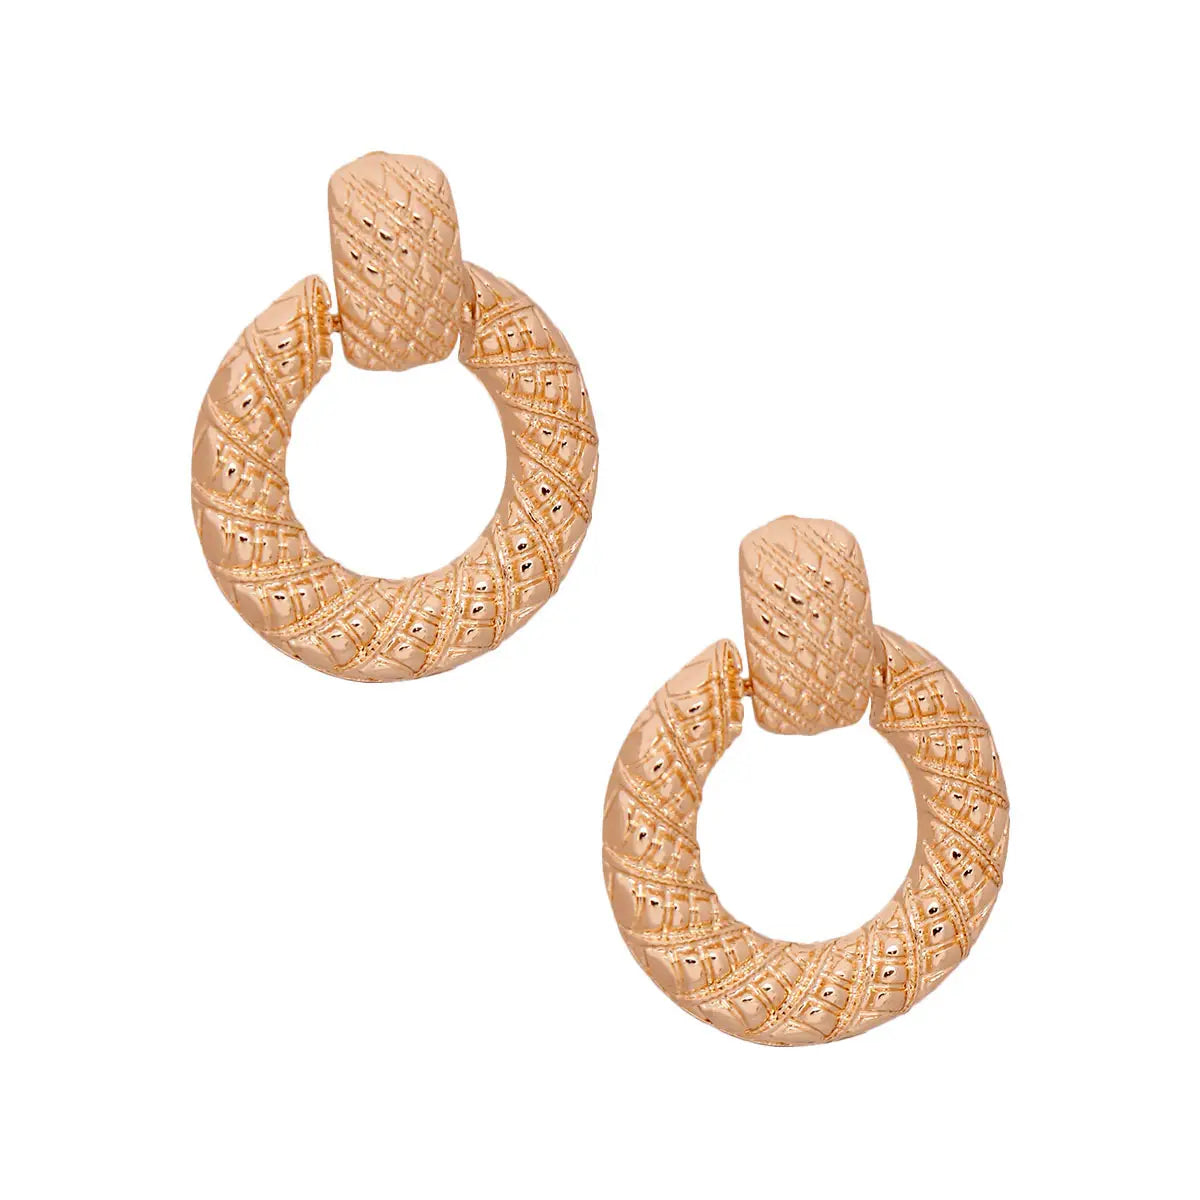 Gold Textured Ring Earrings